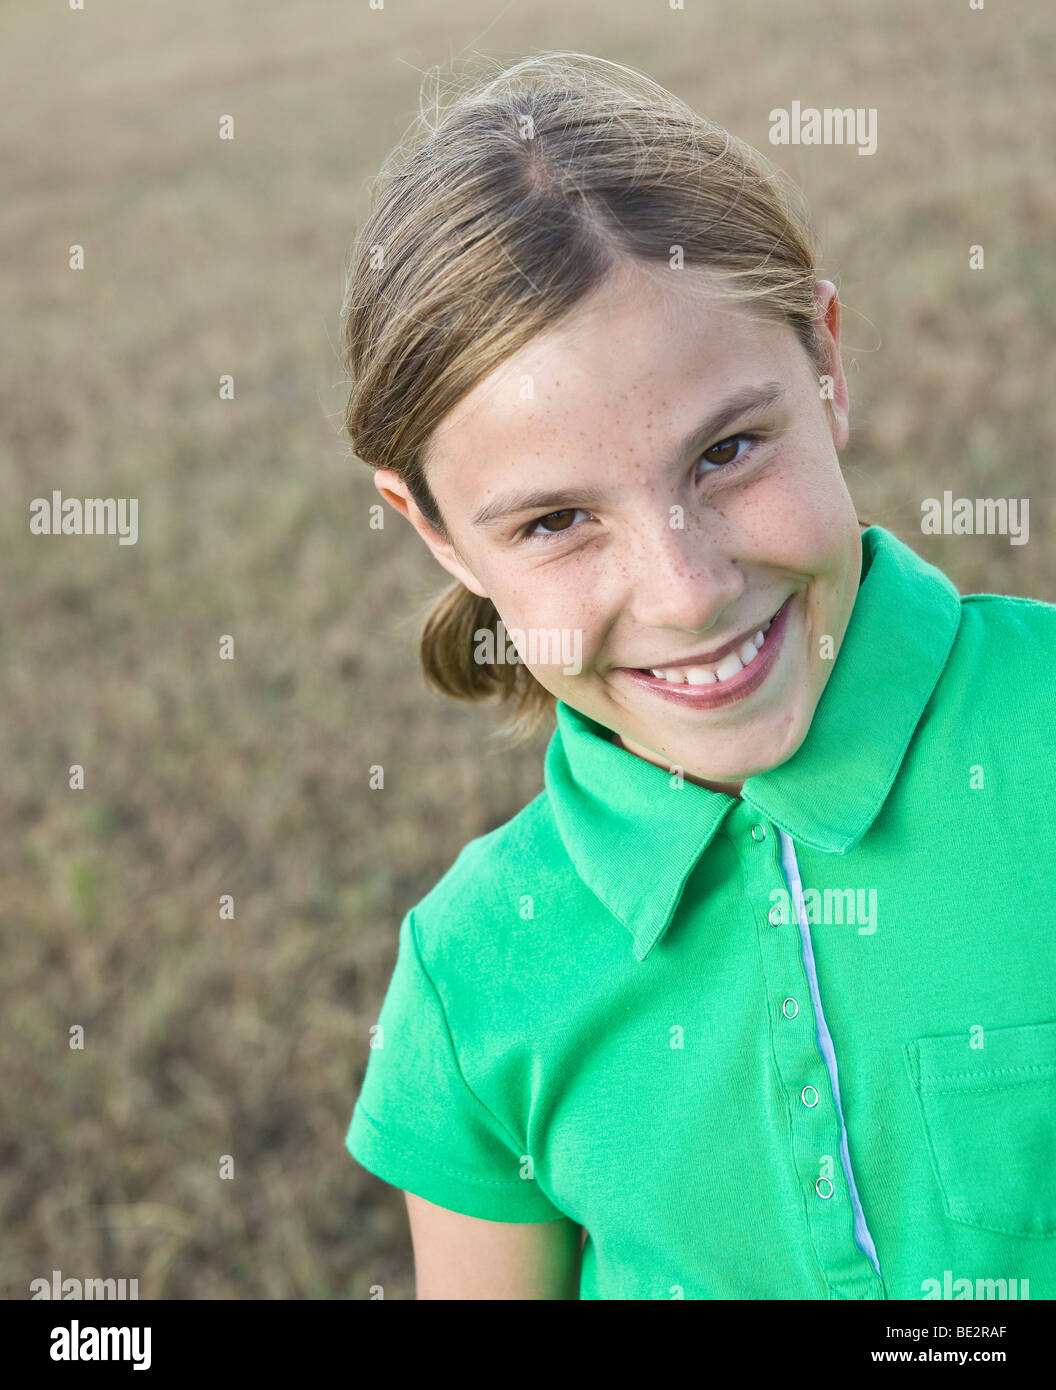 Portrait of a smiling brown-haired girl Stock Photo